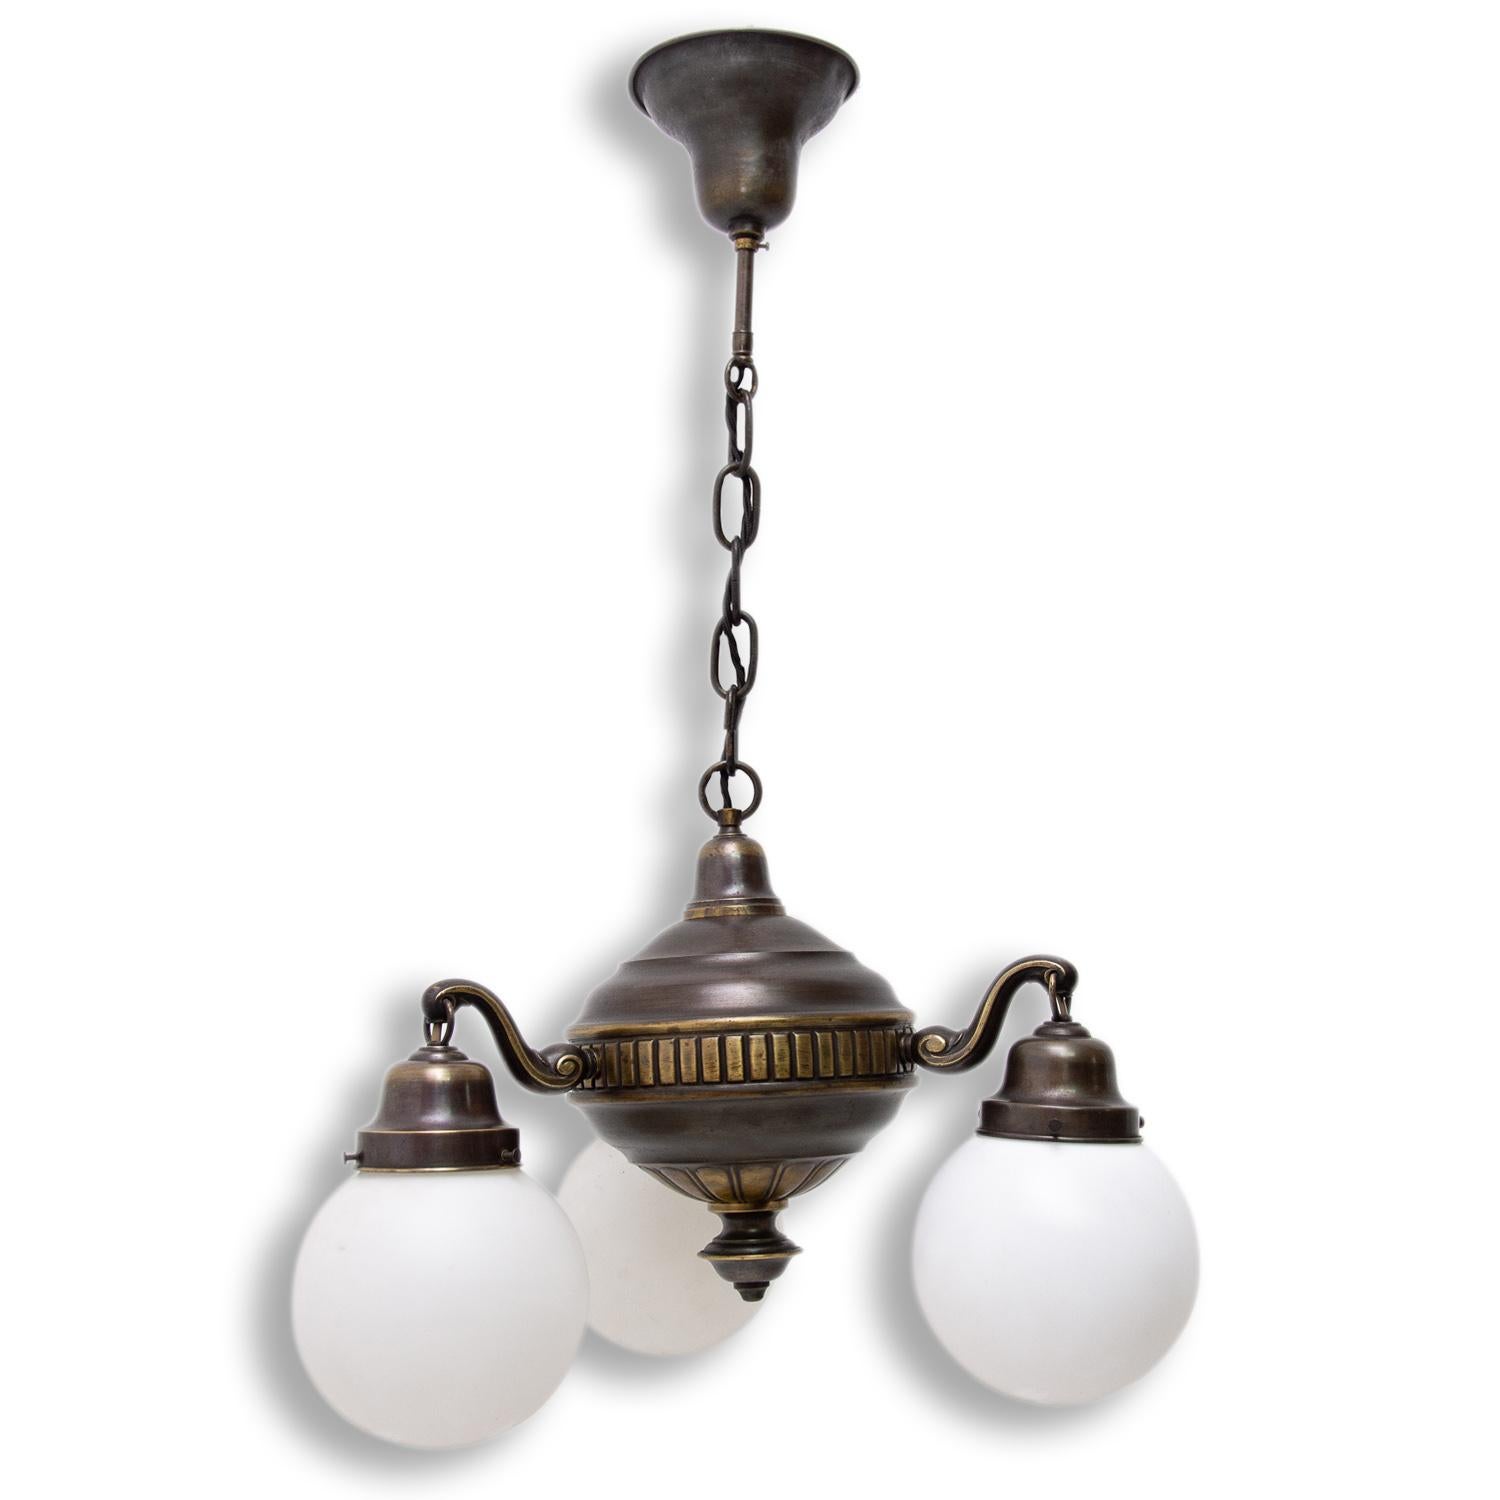 Austrian Historicizing Brass Three-Armed Chandelier, Turn of the 19th and 20th Century